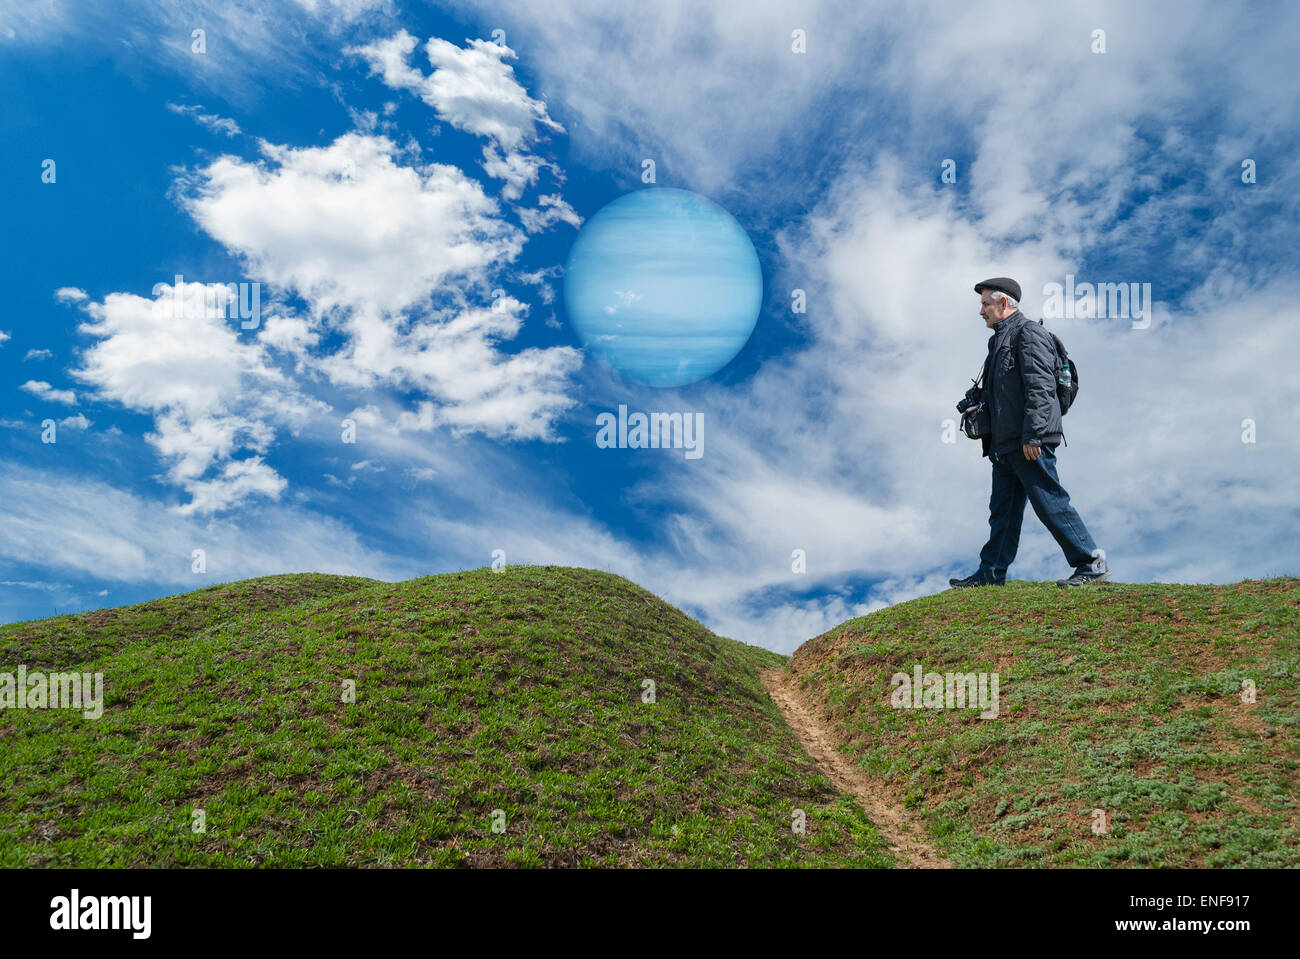 Brave tourist on a desolate planet walking in search of interesting photo locations. Stock Photo